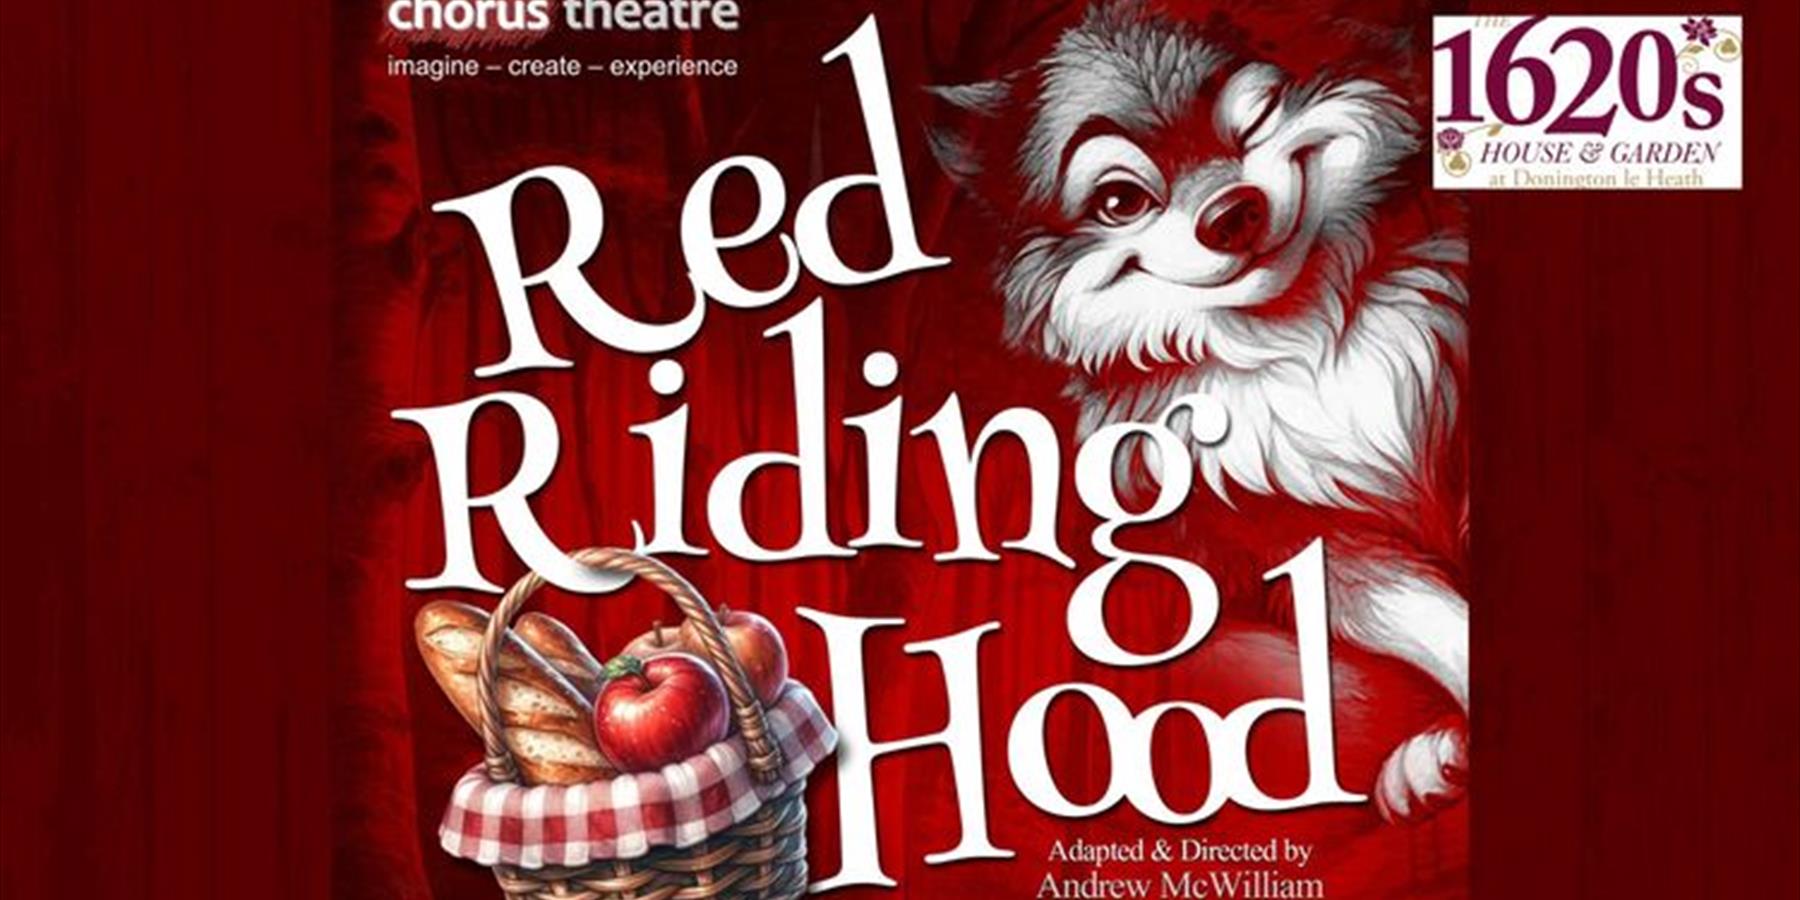 Chorus Theatre Presents: Red Riding Hood – Outdoor Theatre